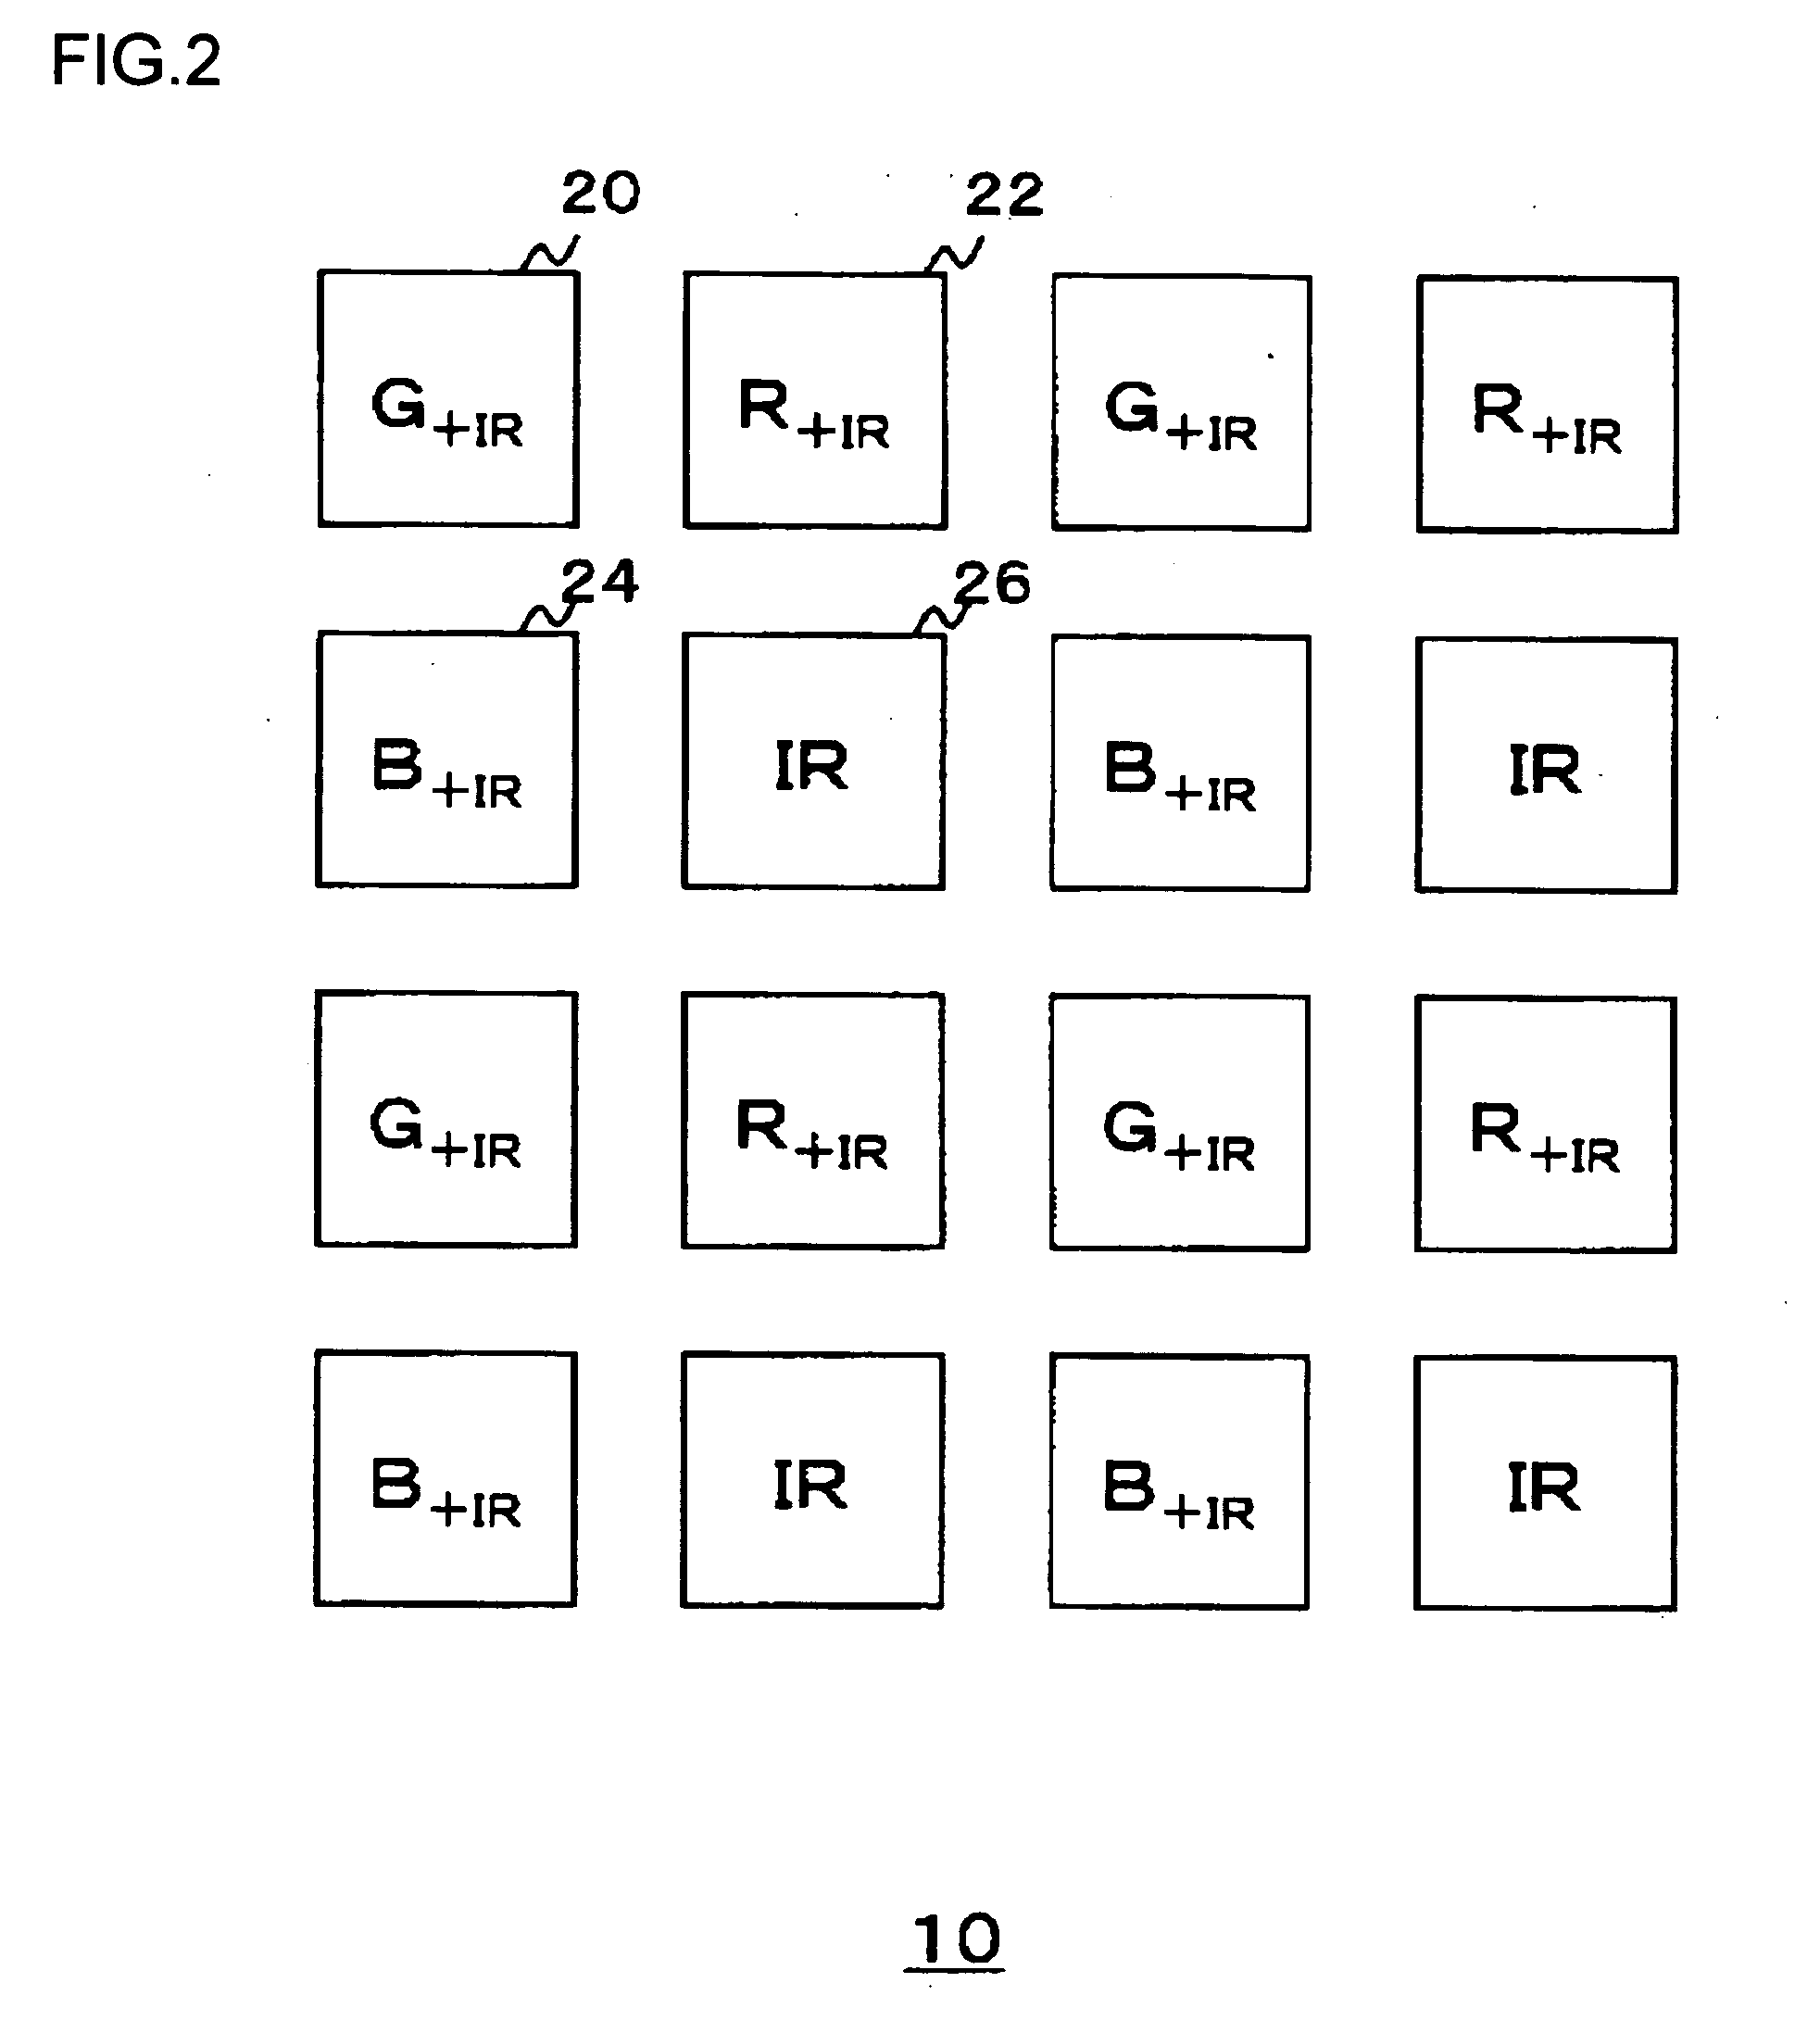 Imaging apparatus provided with imaging device having sensitivity in visible and infrared regions